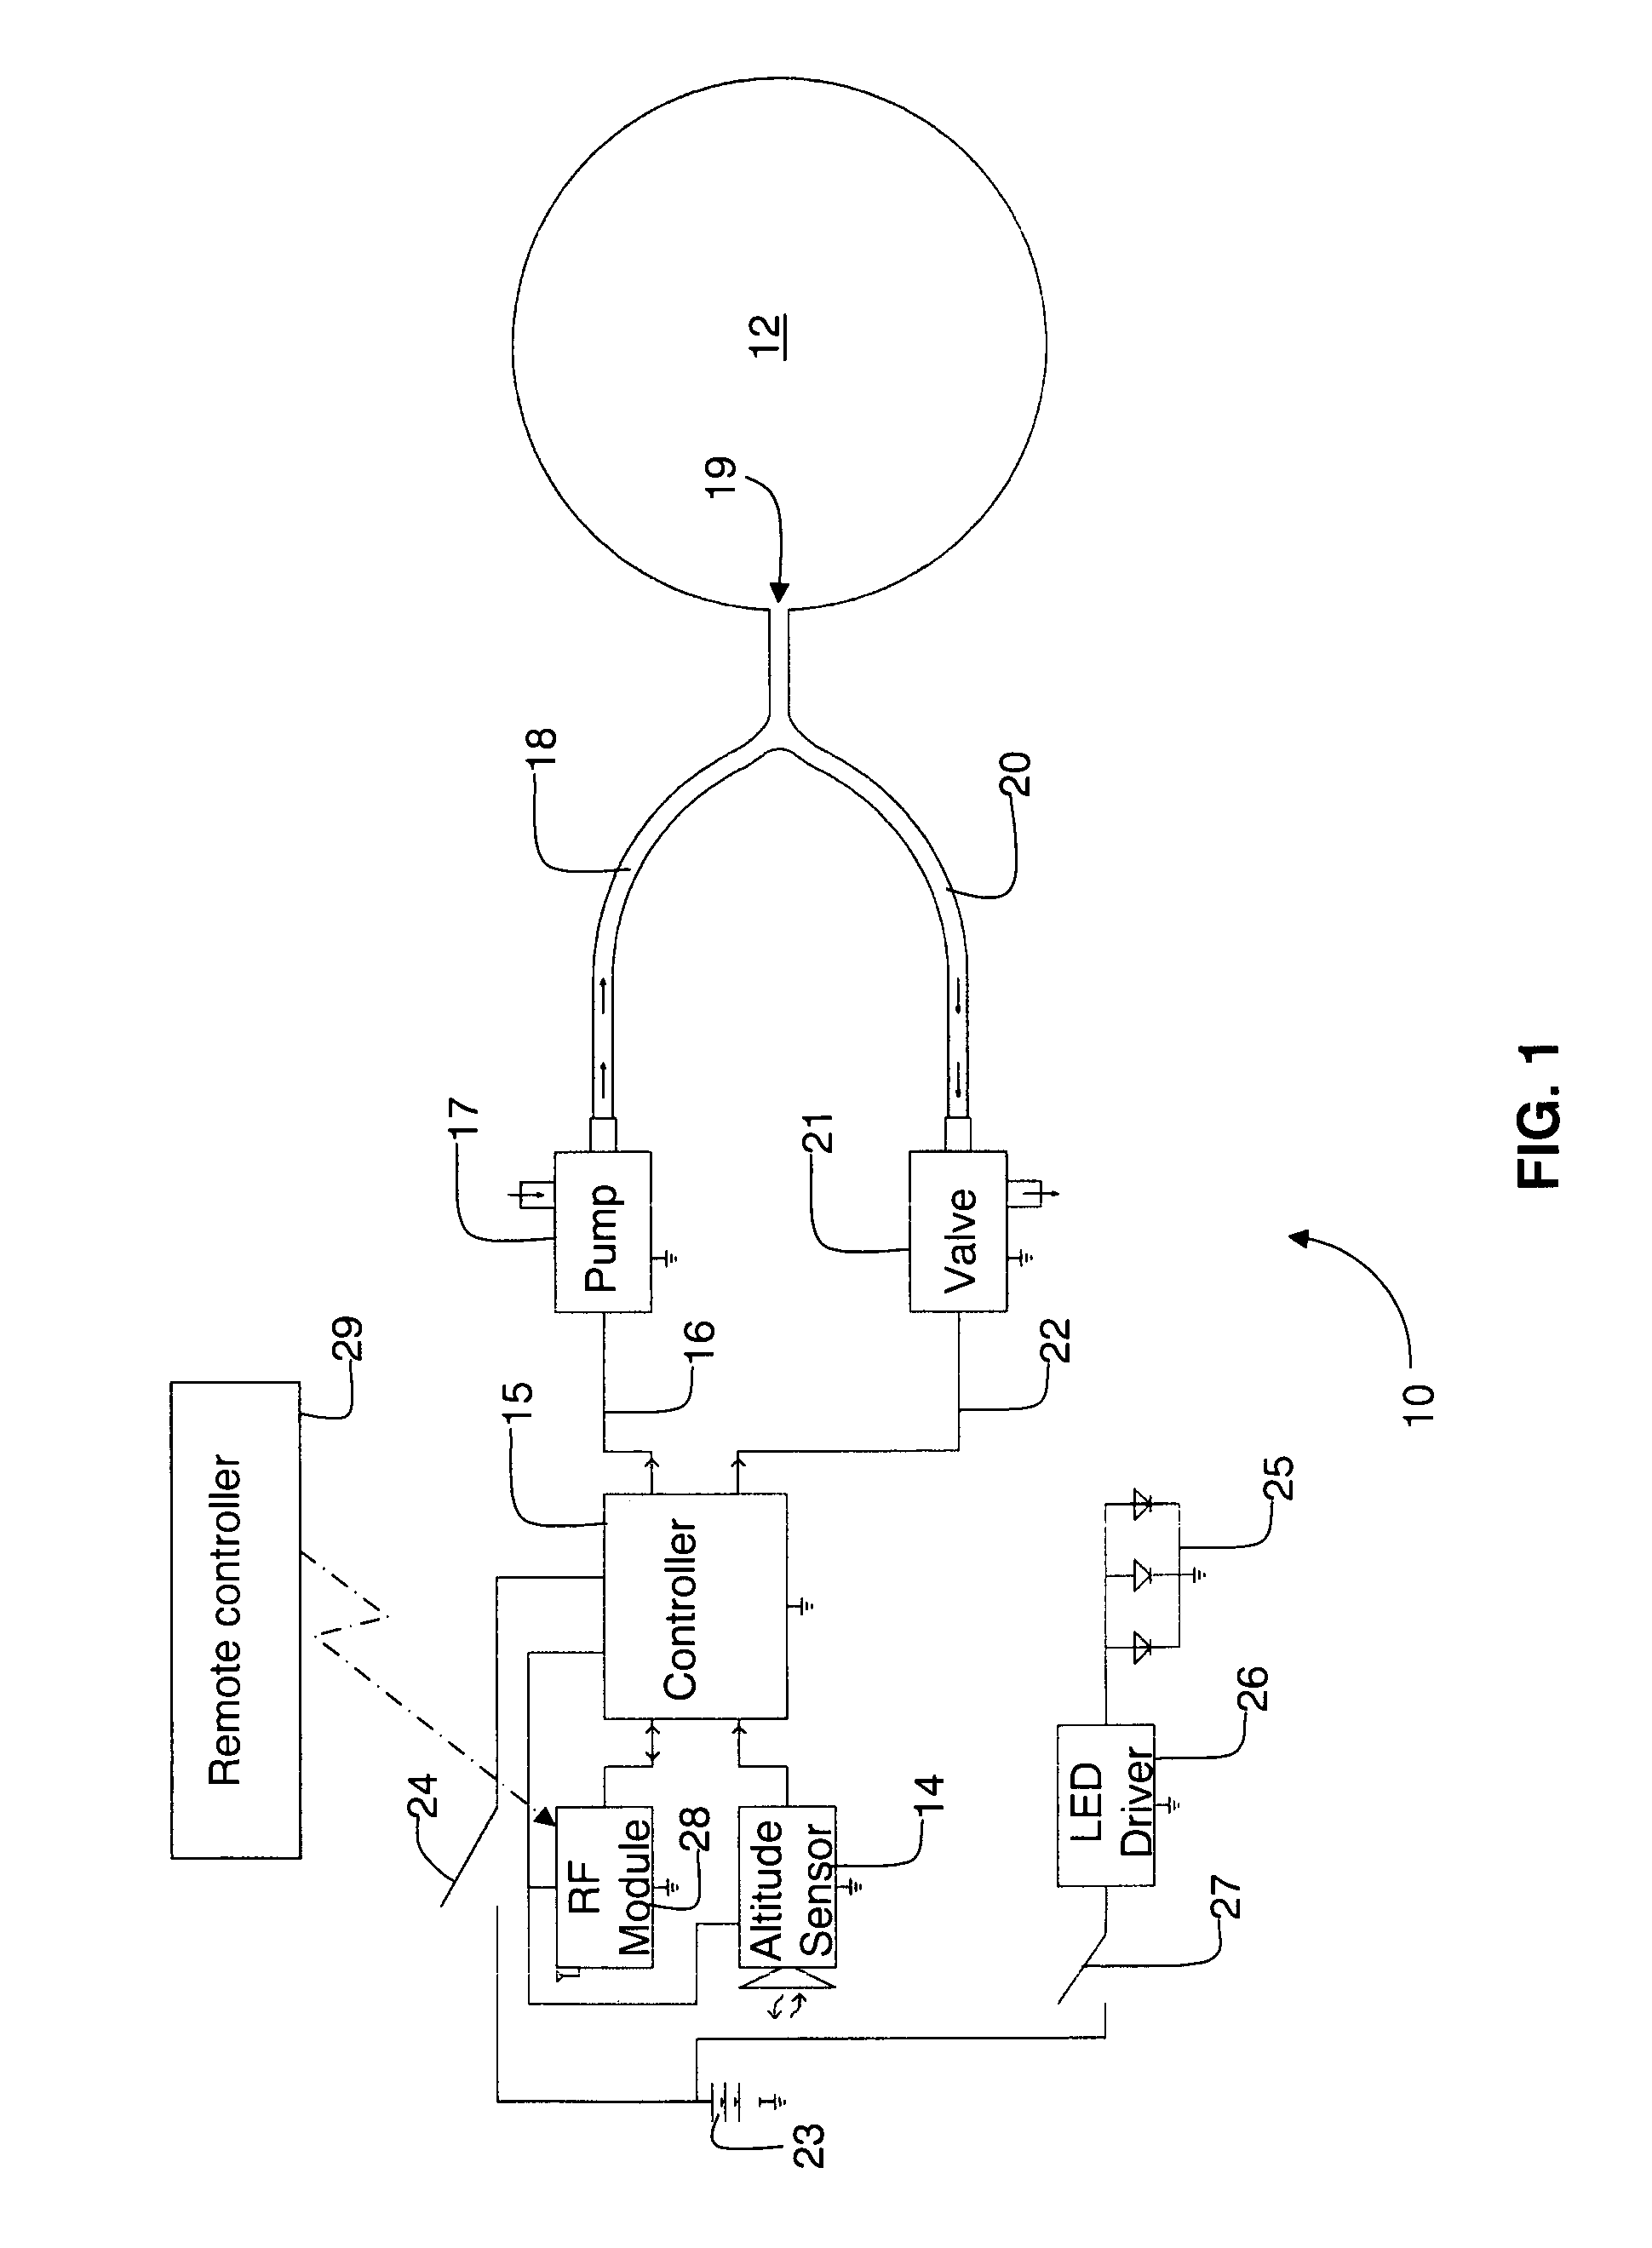 Controllable buoyant system and method